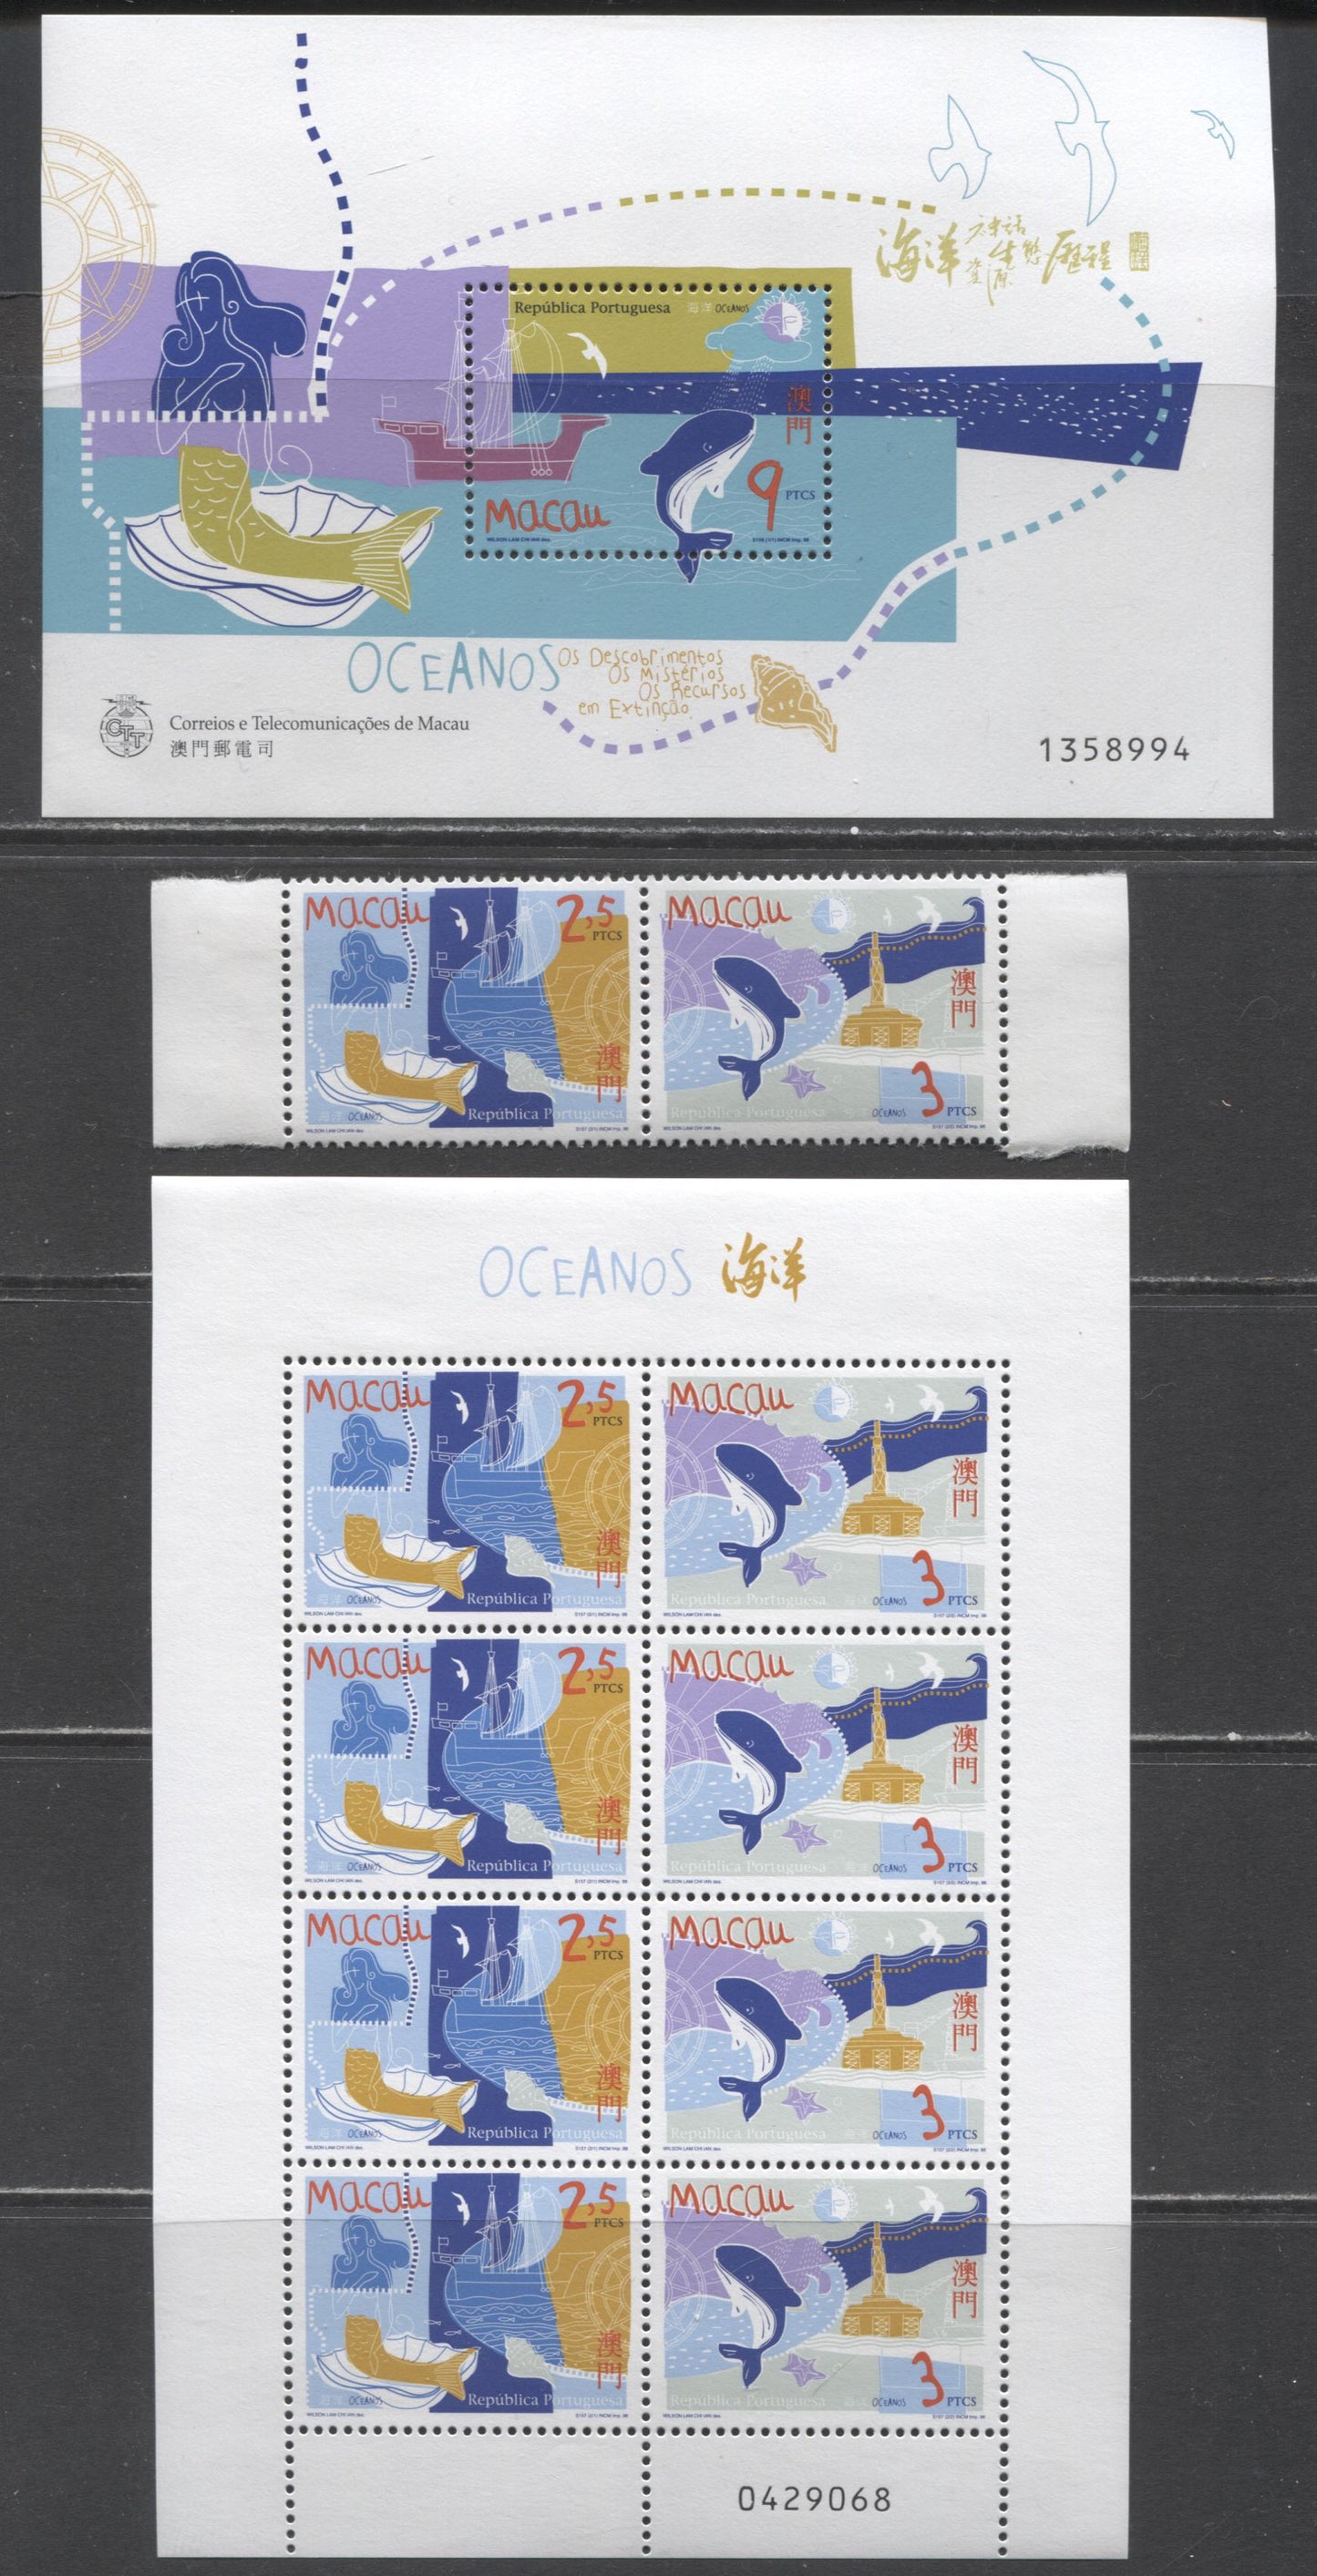 Lot 61 Macao SC#931a-932 1998 Oceans Issue, 3 VFOG/NH Pairs & Strip Of 8, Click on Listing to See ALL Pictures, 2017 Scott Cat. $12.75